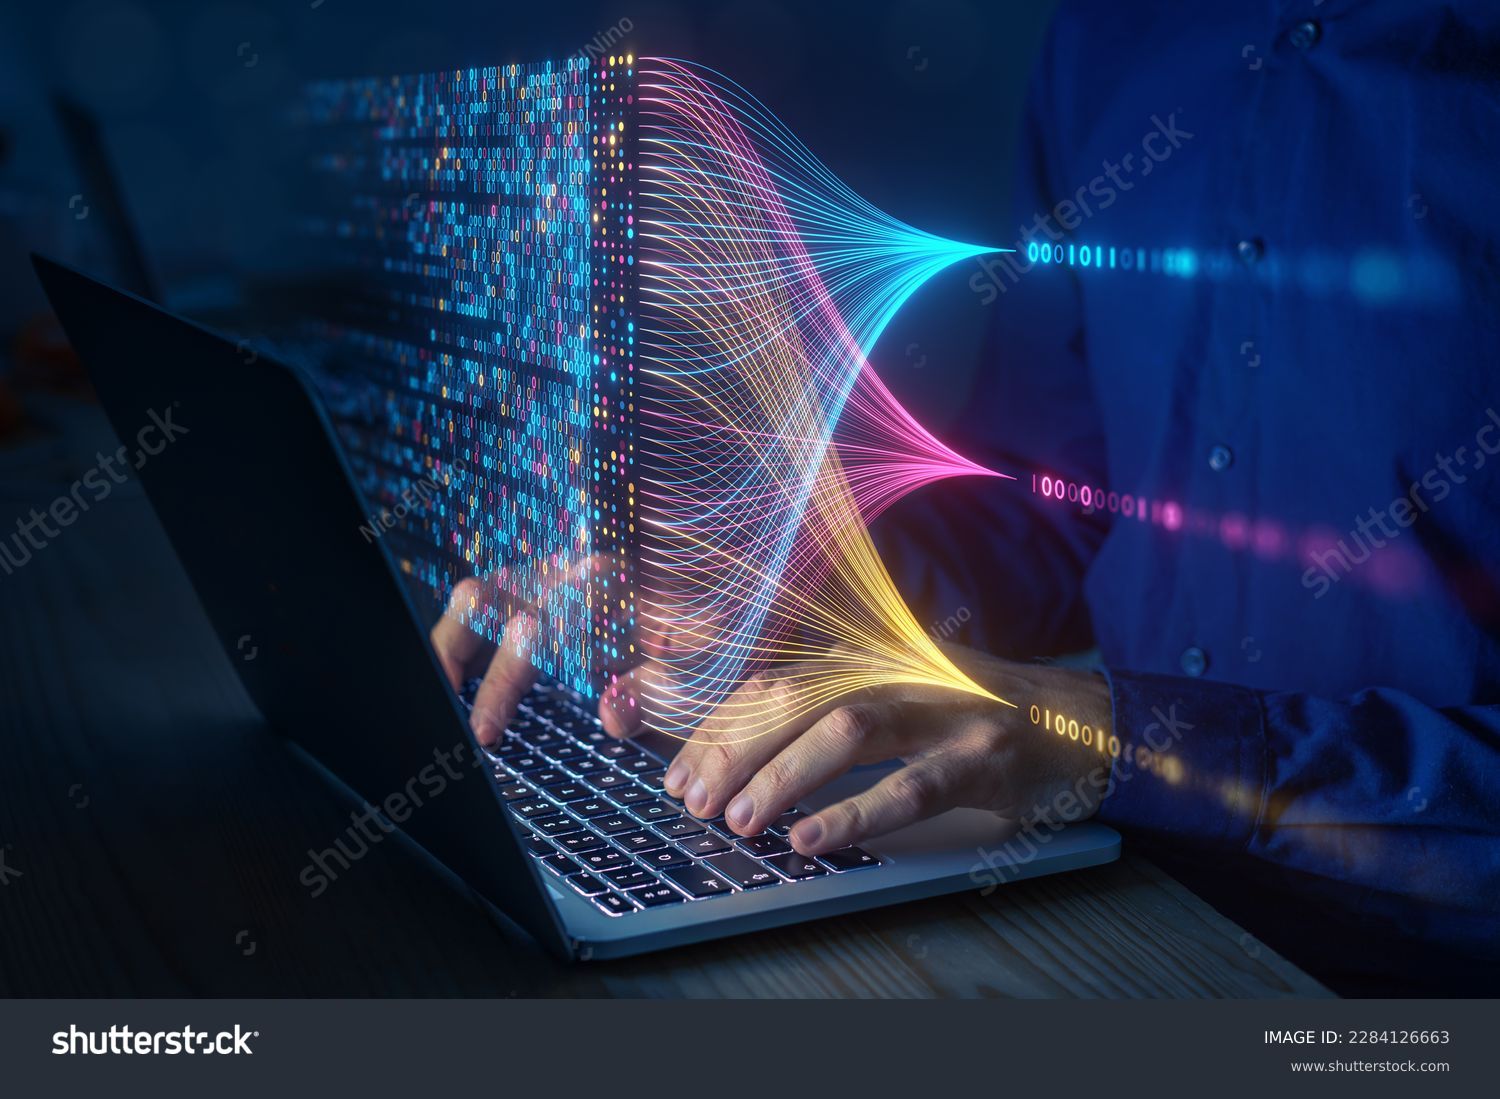 Data science and big data technology. Scientist computing, analysing and visualizing complex data set on computer. Data mining, artificial intelligence, machine learning, business analytics. #2284126663